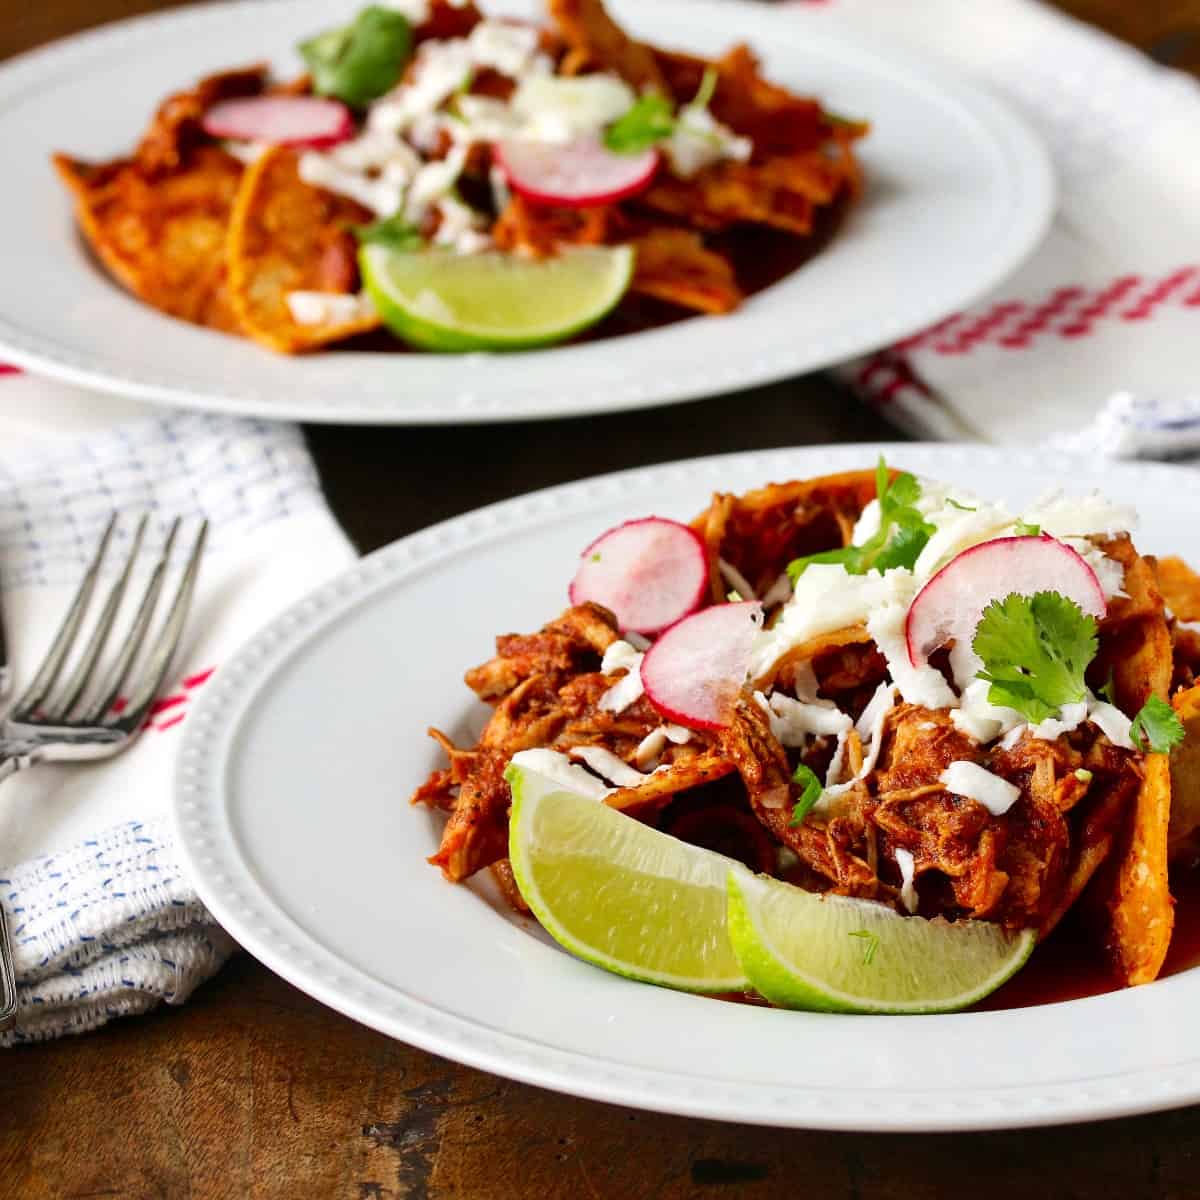 Chicken chilaquiles with casera chips